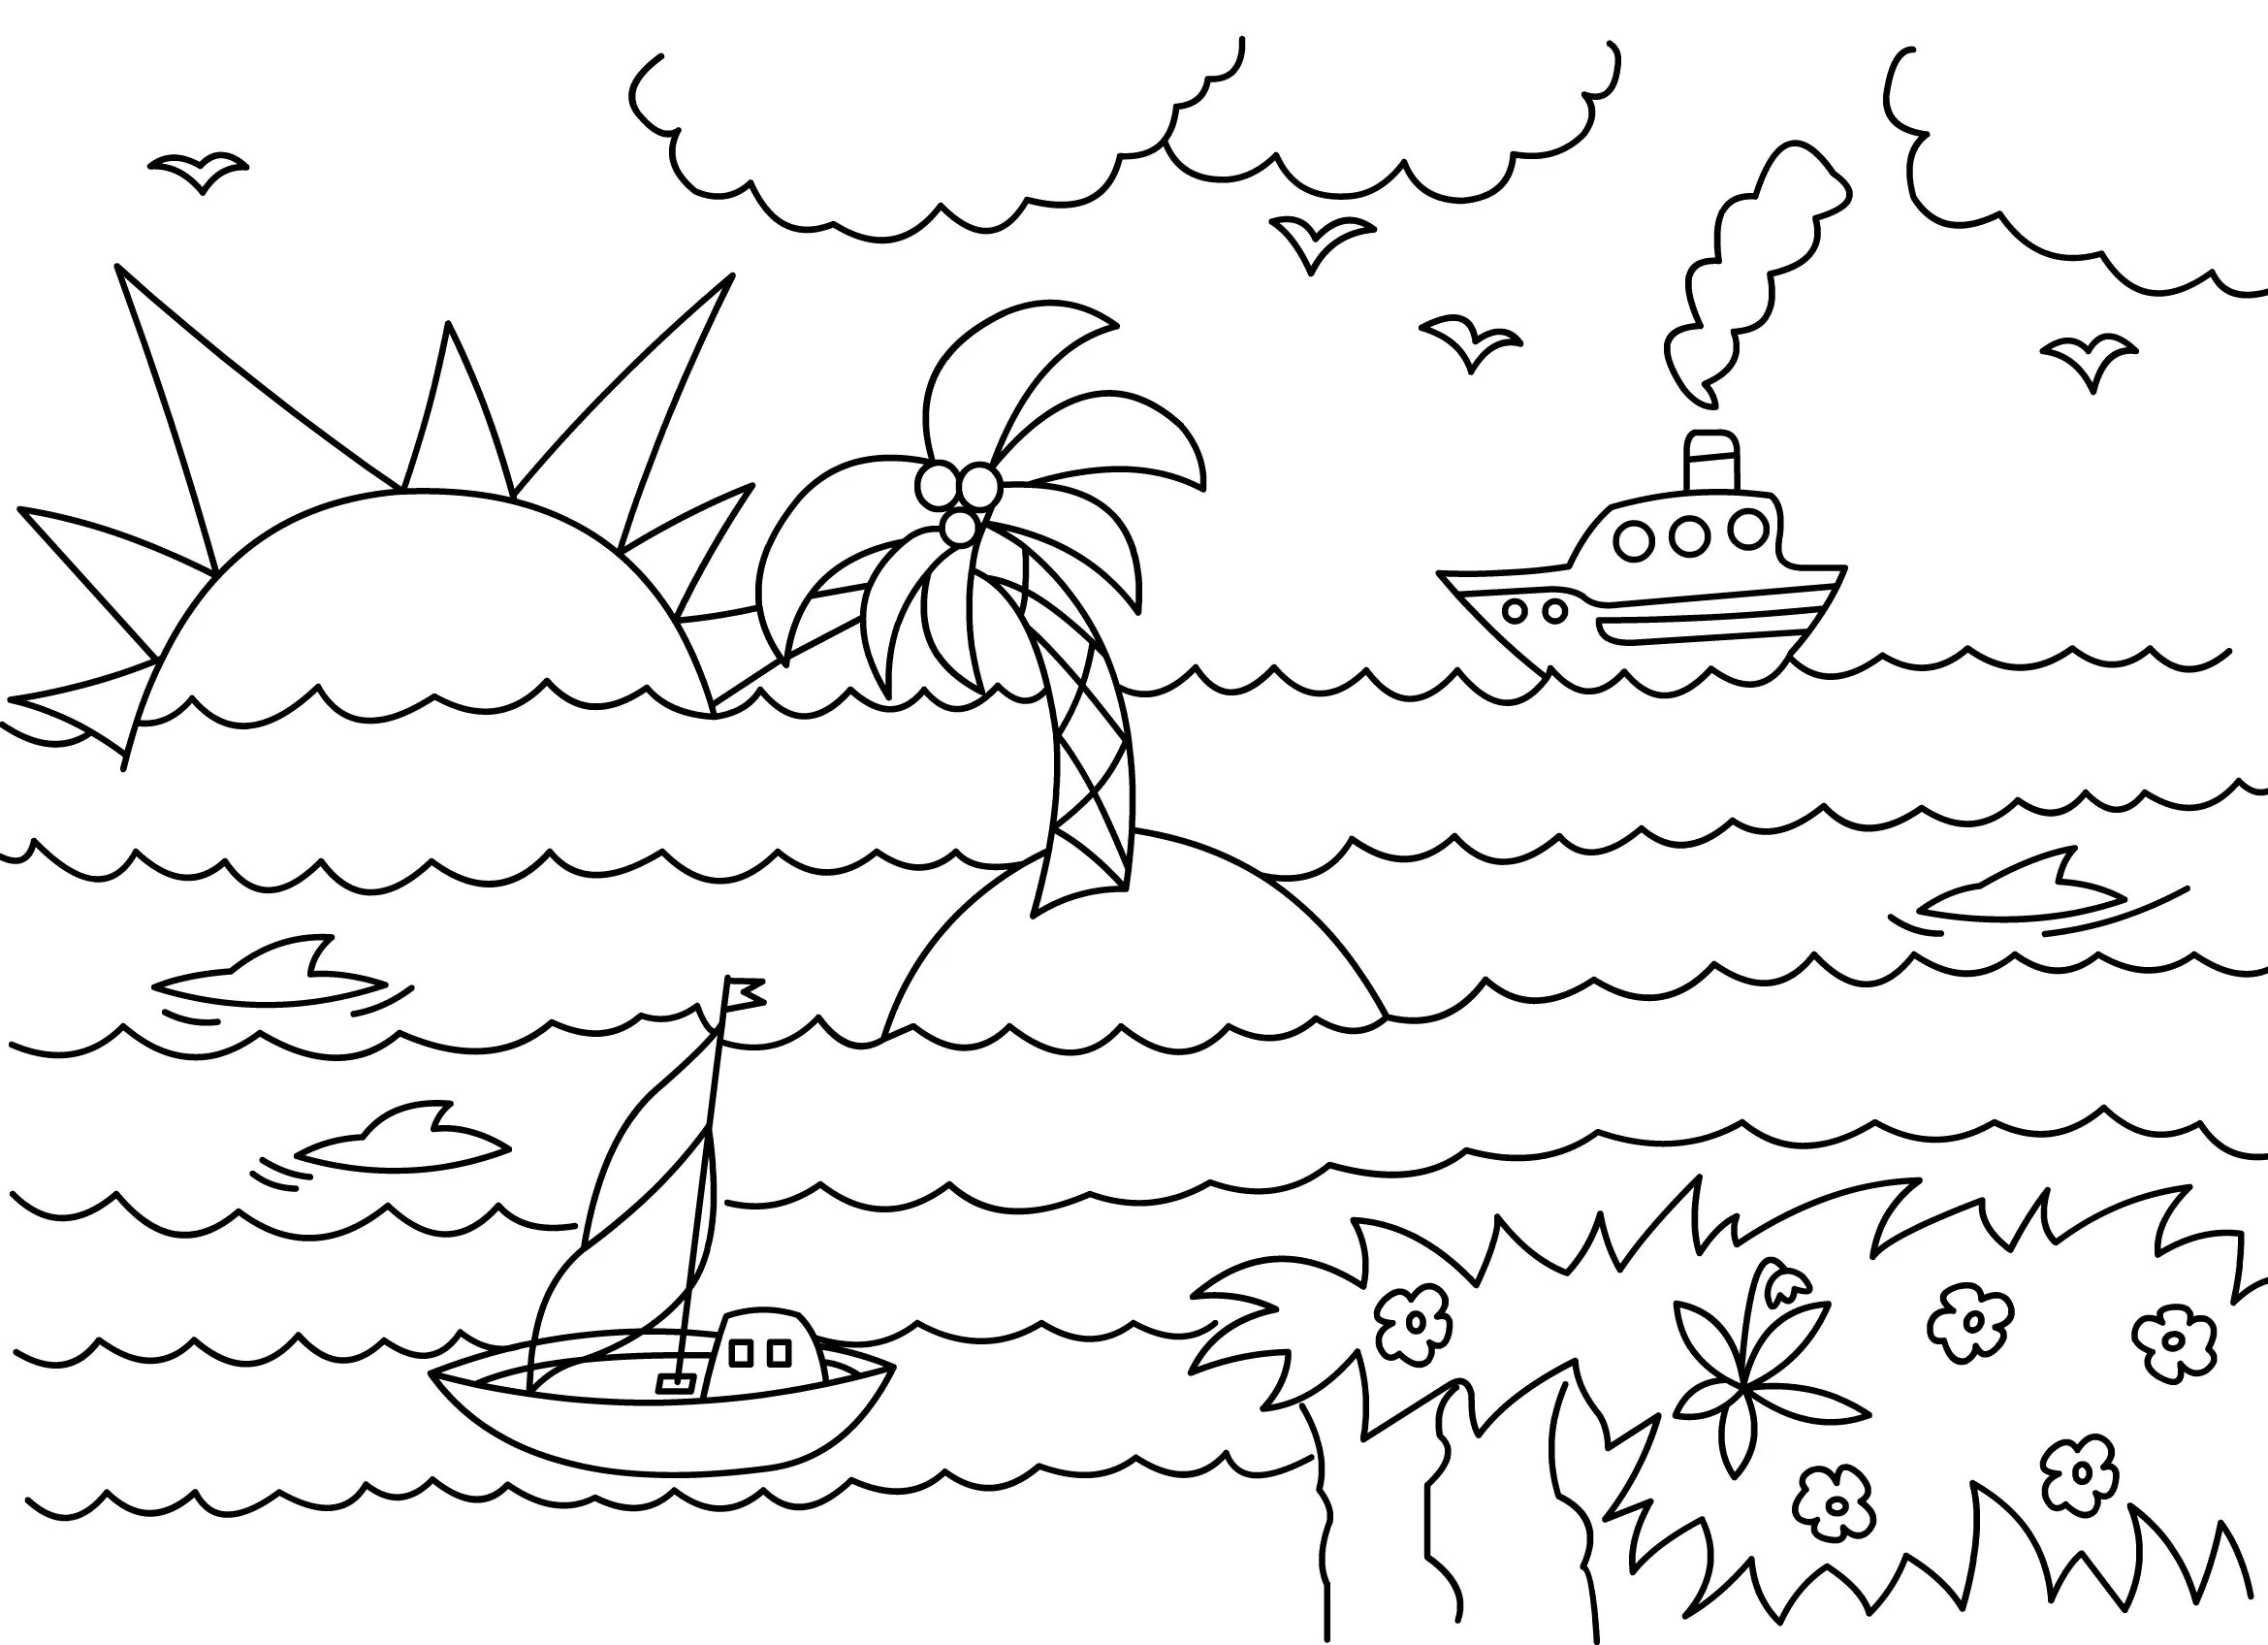 Refreshing marine coloring book for 6-7 year olds